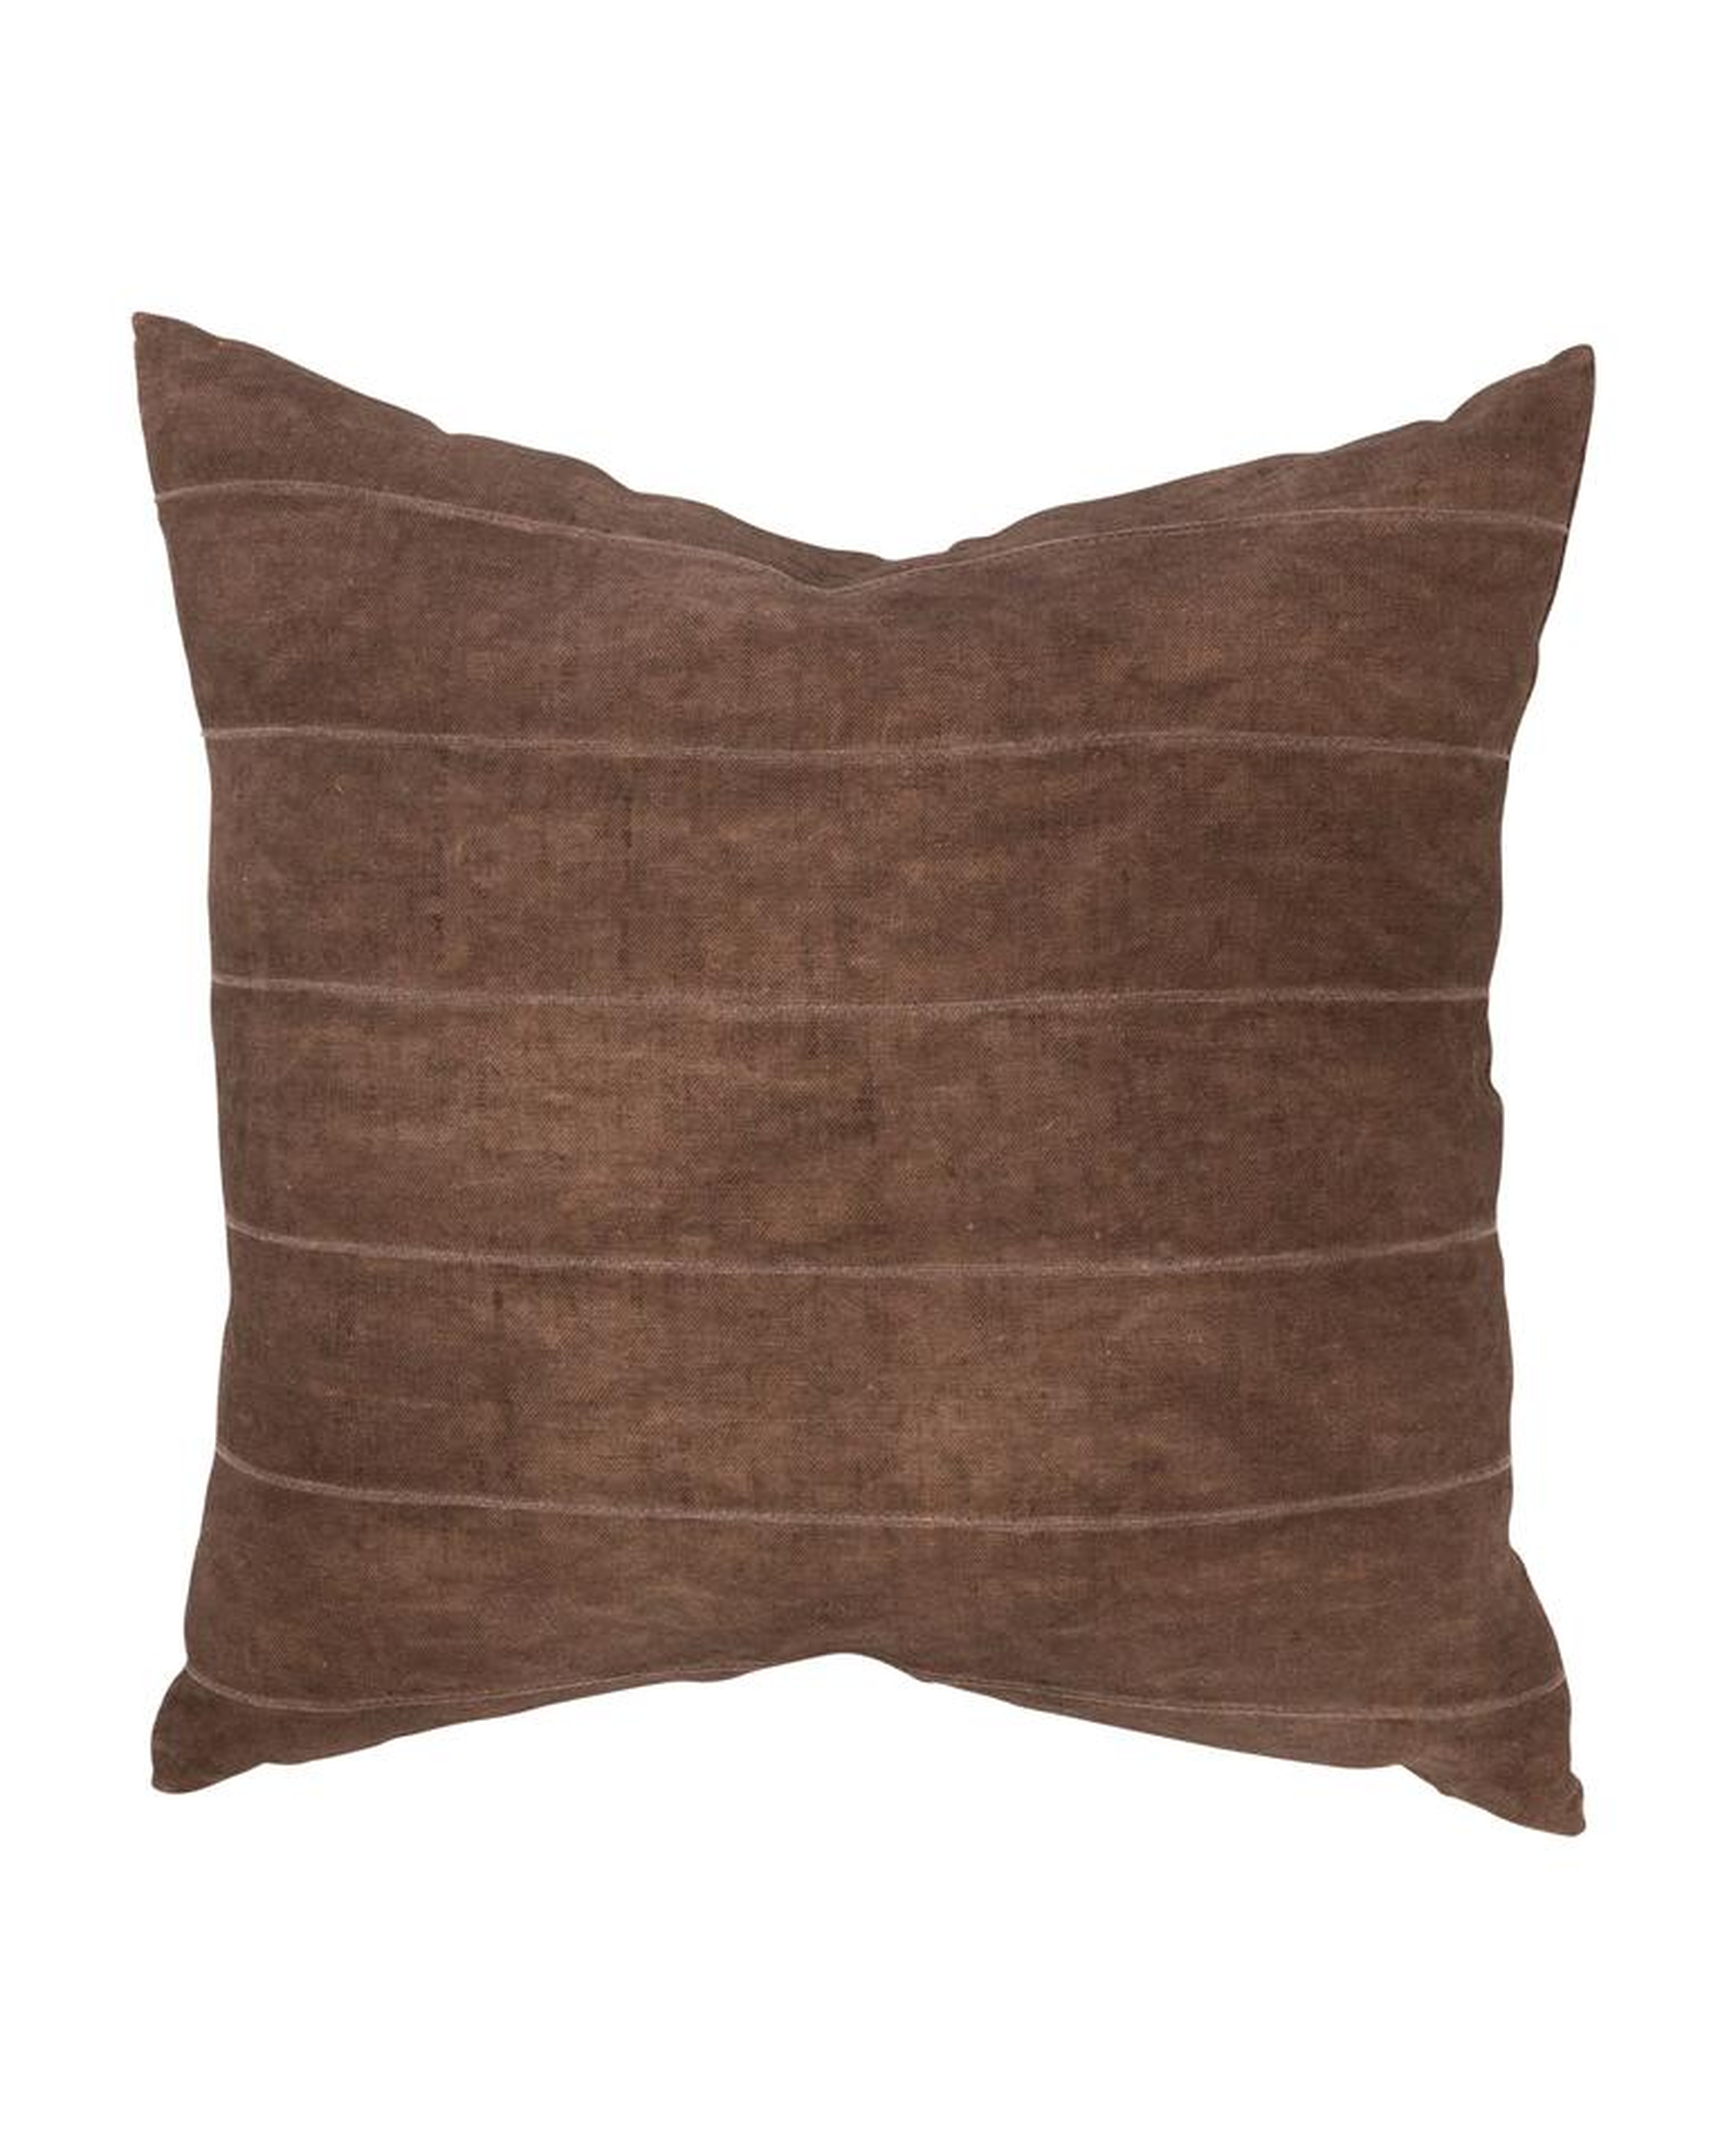 ABNER PILLOW WITH DOWN INSERT - CHOCOLATE - 22" x 22" - McGee & Co.